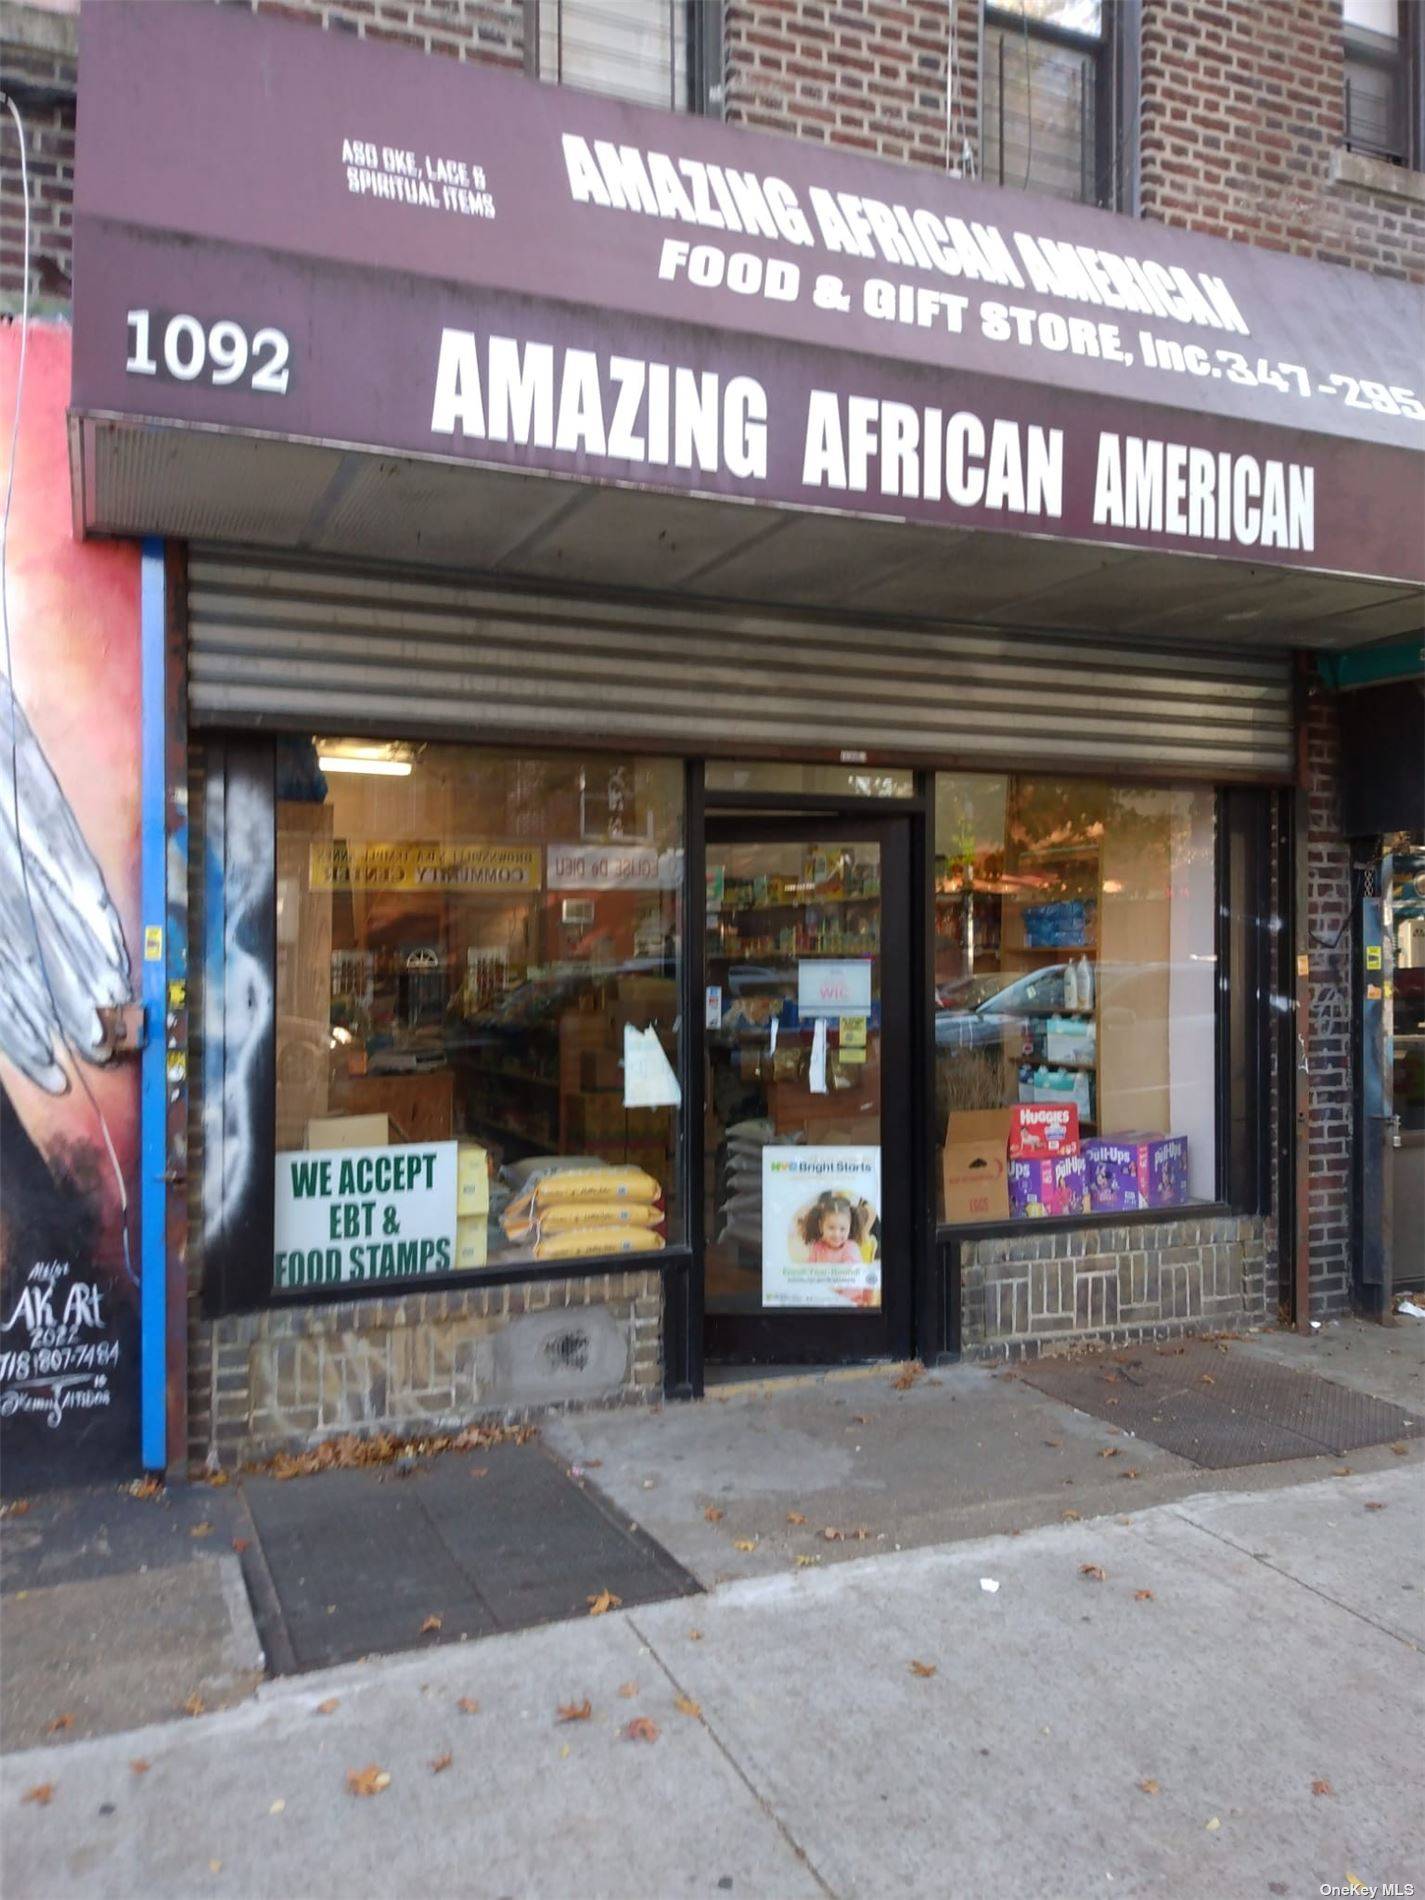 EXISTING BUSINESS FOR SALE This business has been on the market for over 10 years under the operating name of Amazing African American Food and Gift Store Inc.